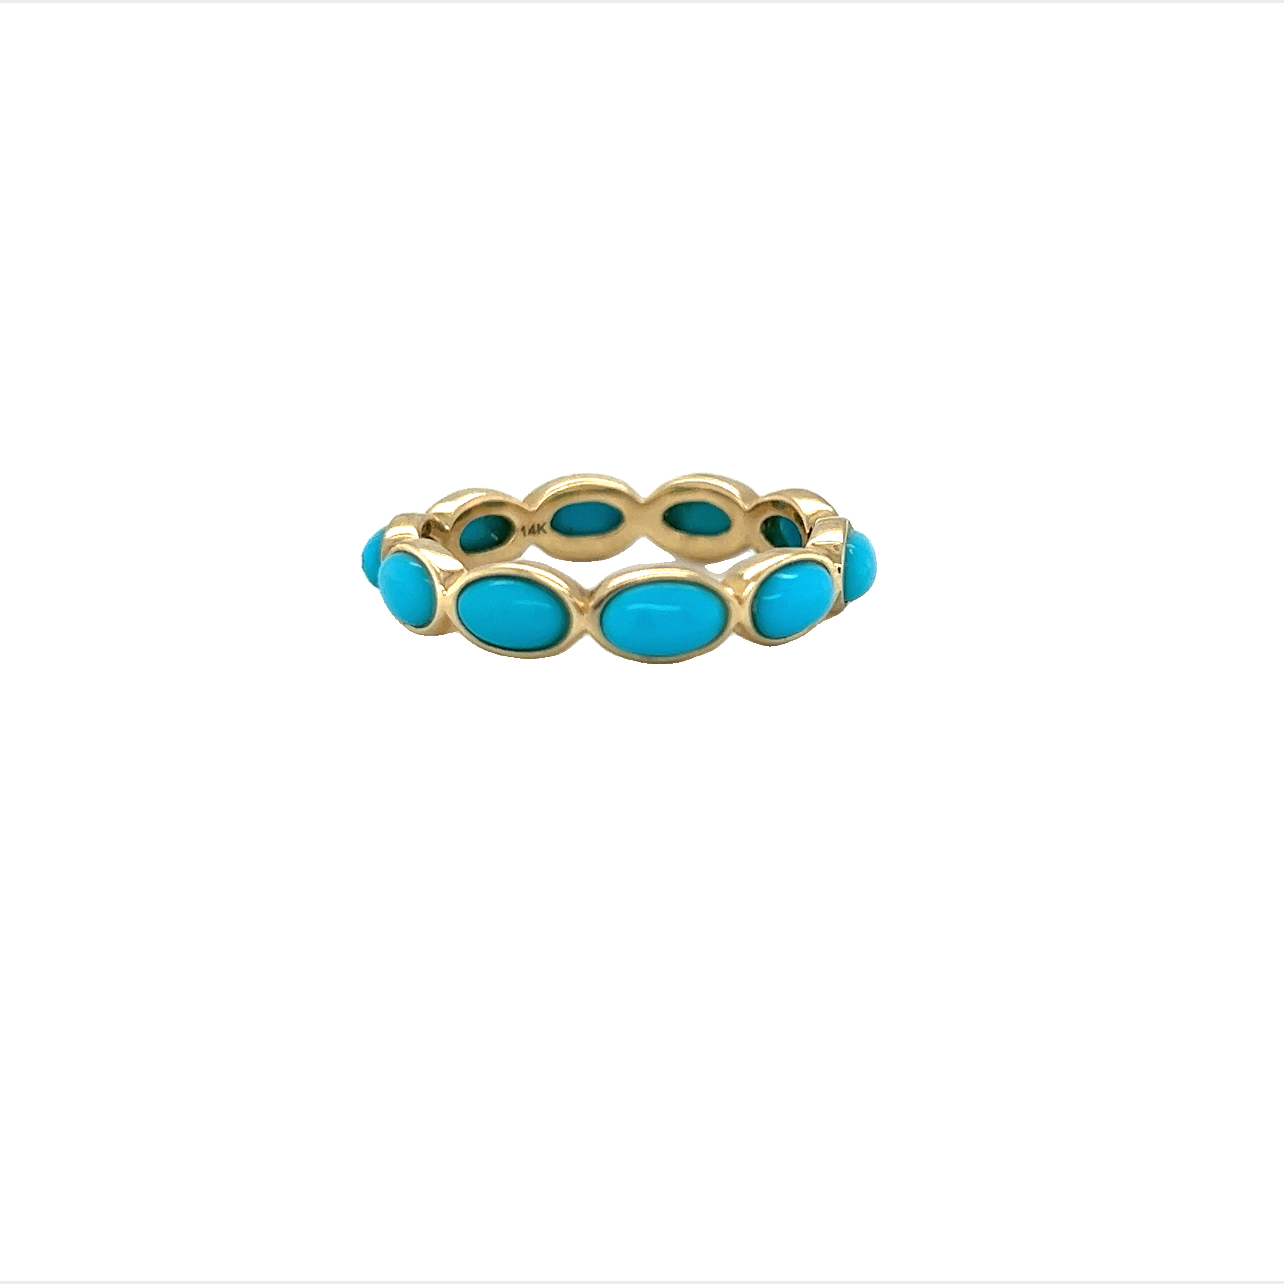 Featured image for “Oval Turquoise Band”